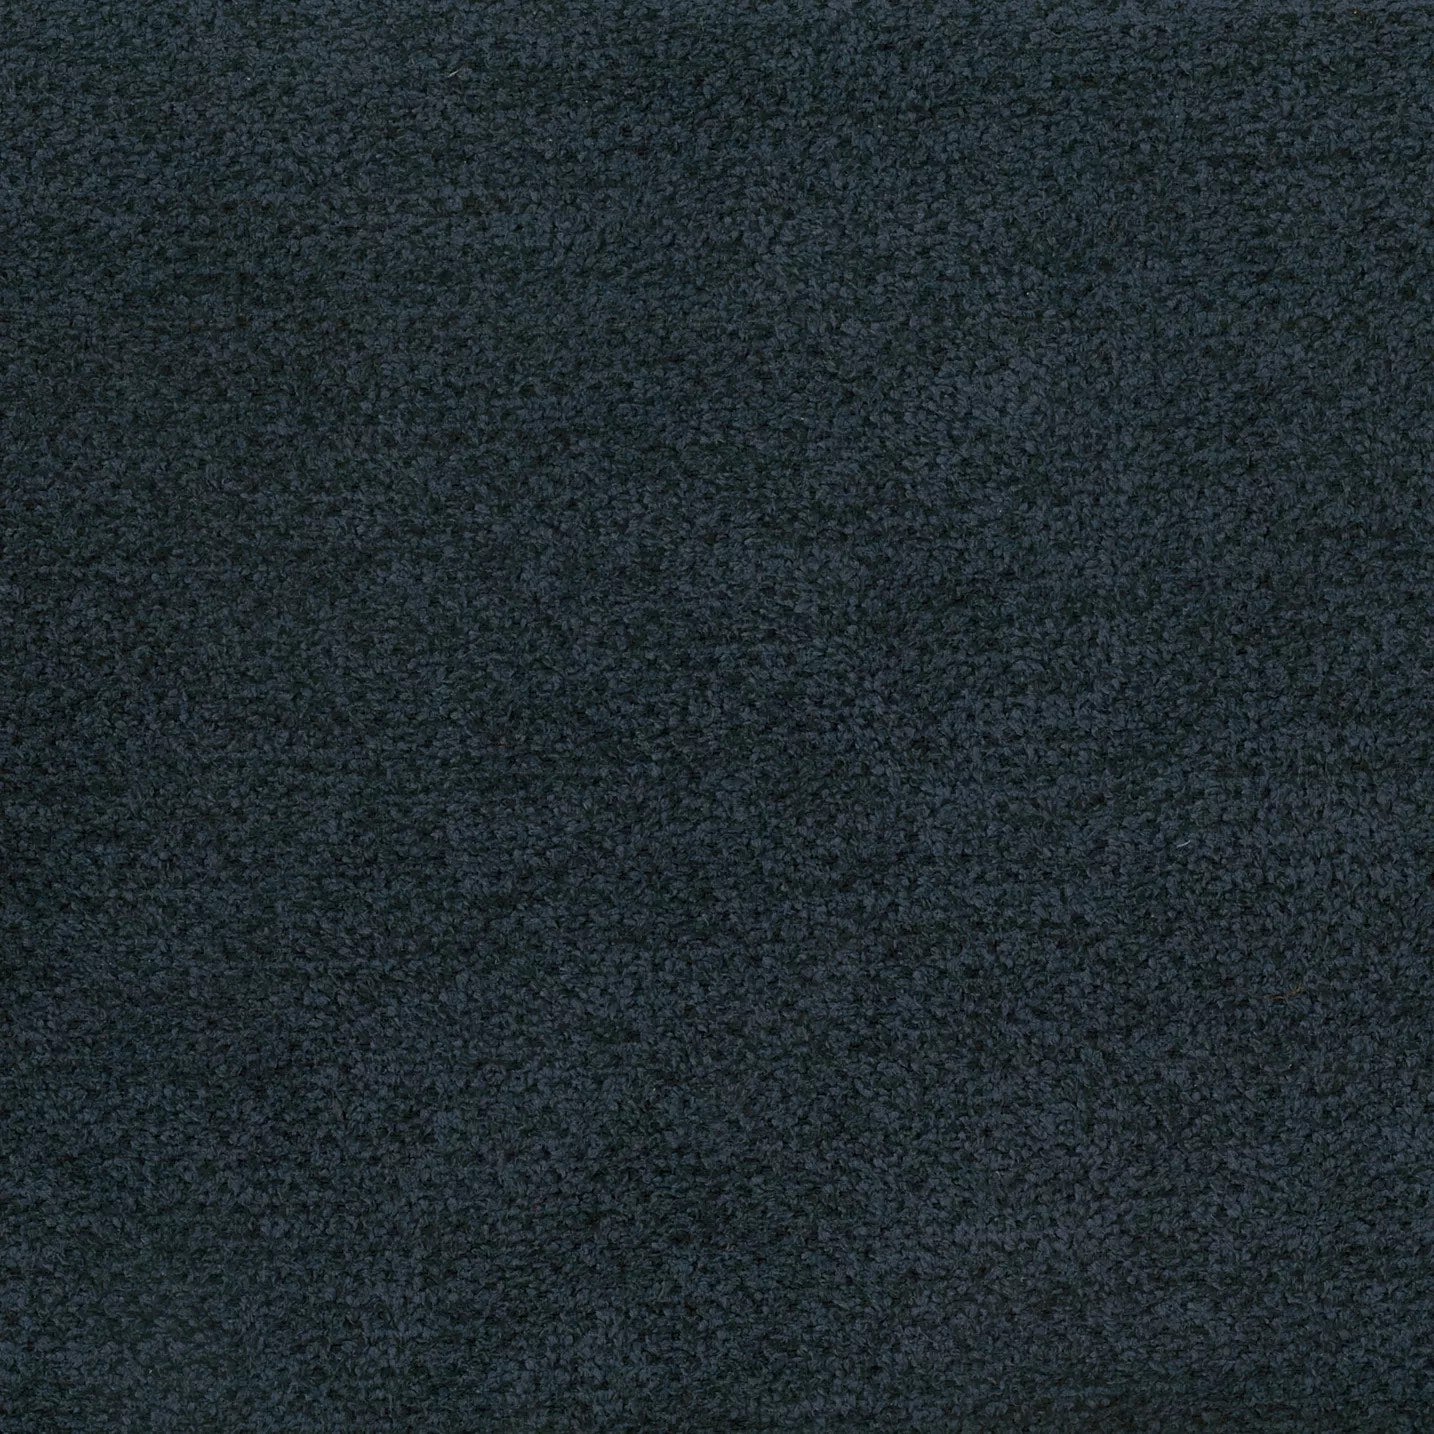 KINDRED MIDNIGHT FABRIC SAMPLE | VALUE COLLECTION